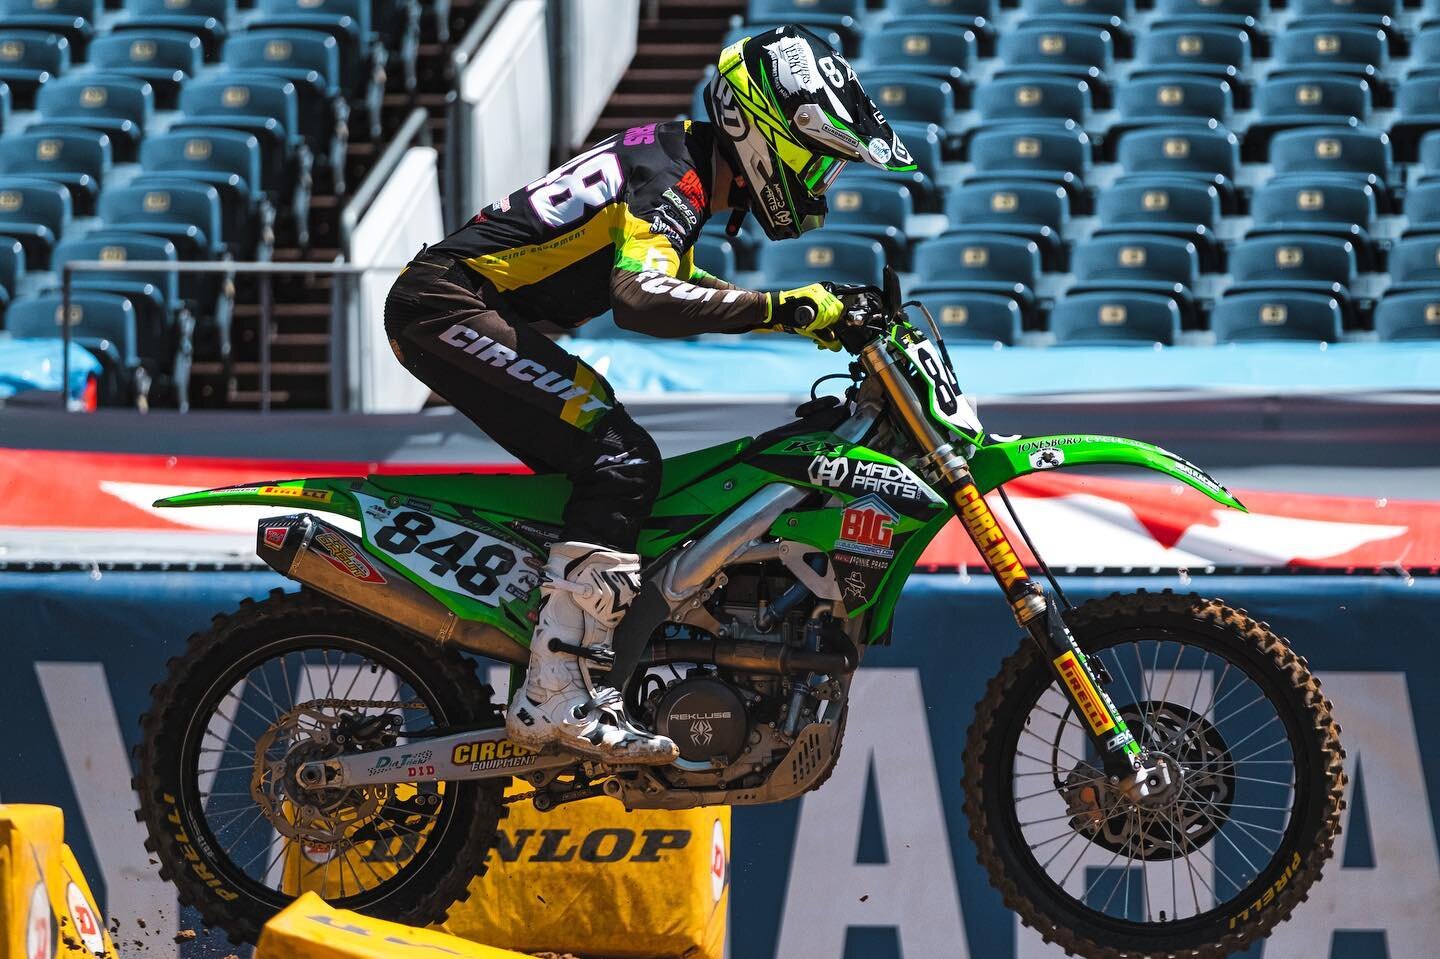 2023 was our 5th season working with @joancros48 

Joan resumed racing with us this year after @bubbapauli went out with an injury. 

The 4x Spanish supercross champion is known for his excellent starts. He has led countless laps in the LCQ&rsquo;s b